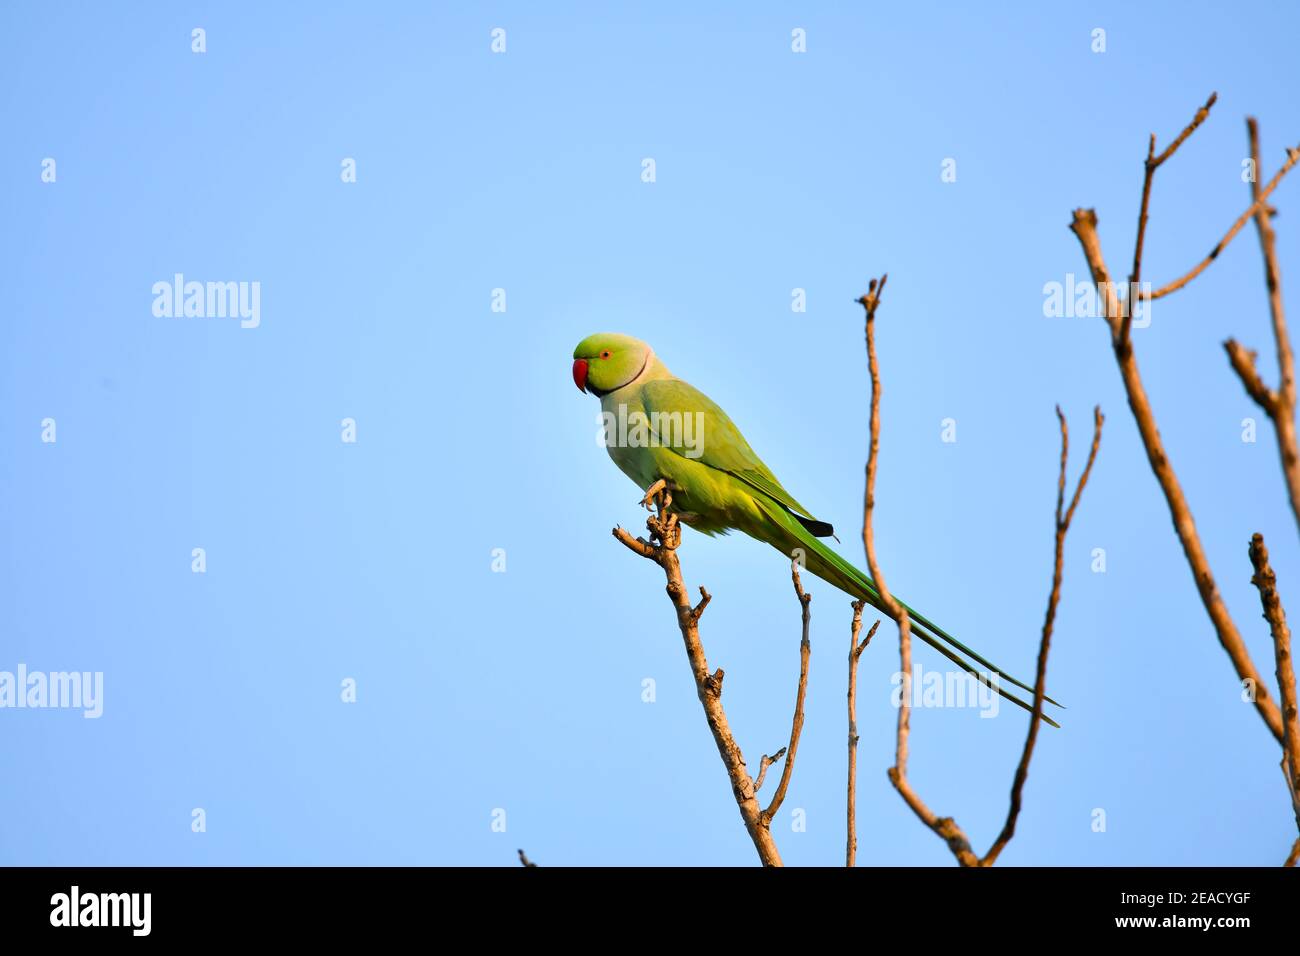 The Rose-ringed Parakeet Project - South Africa